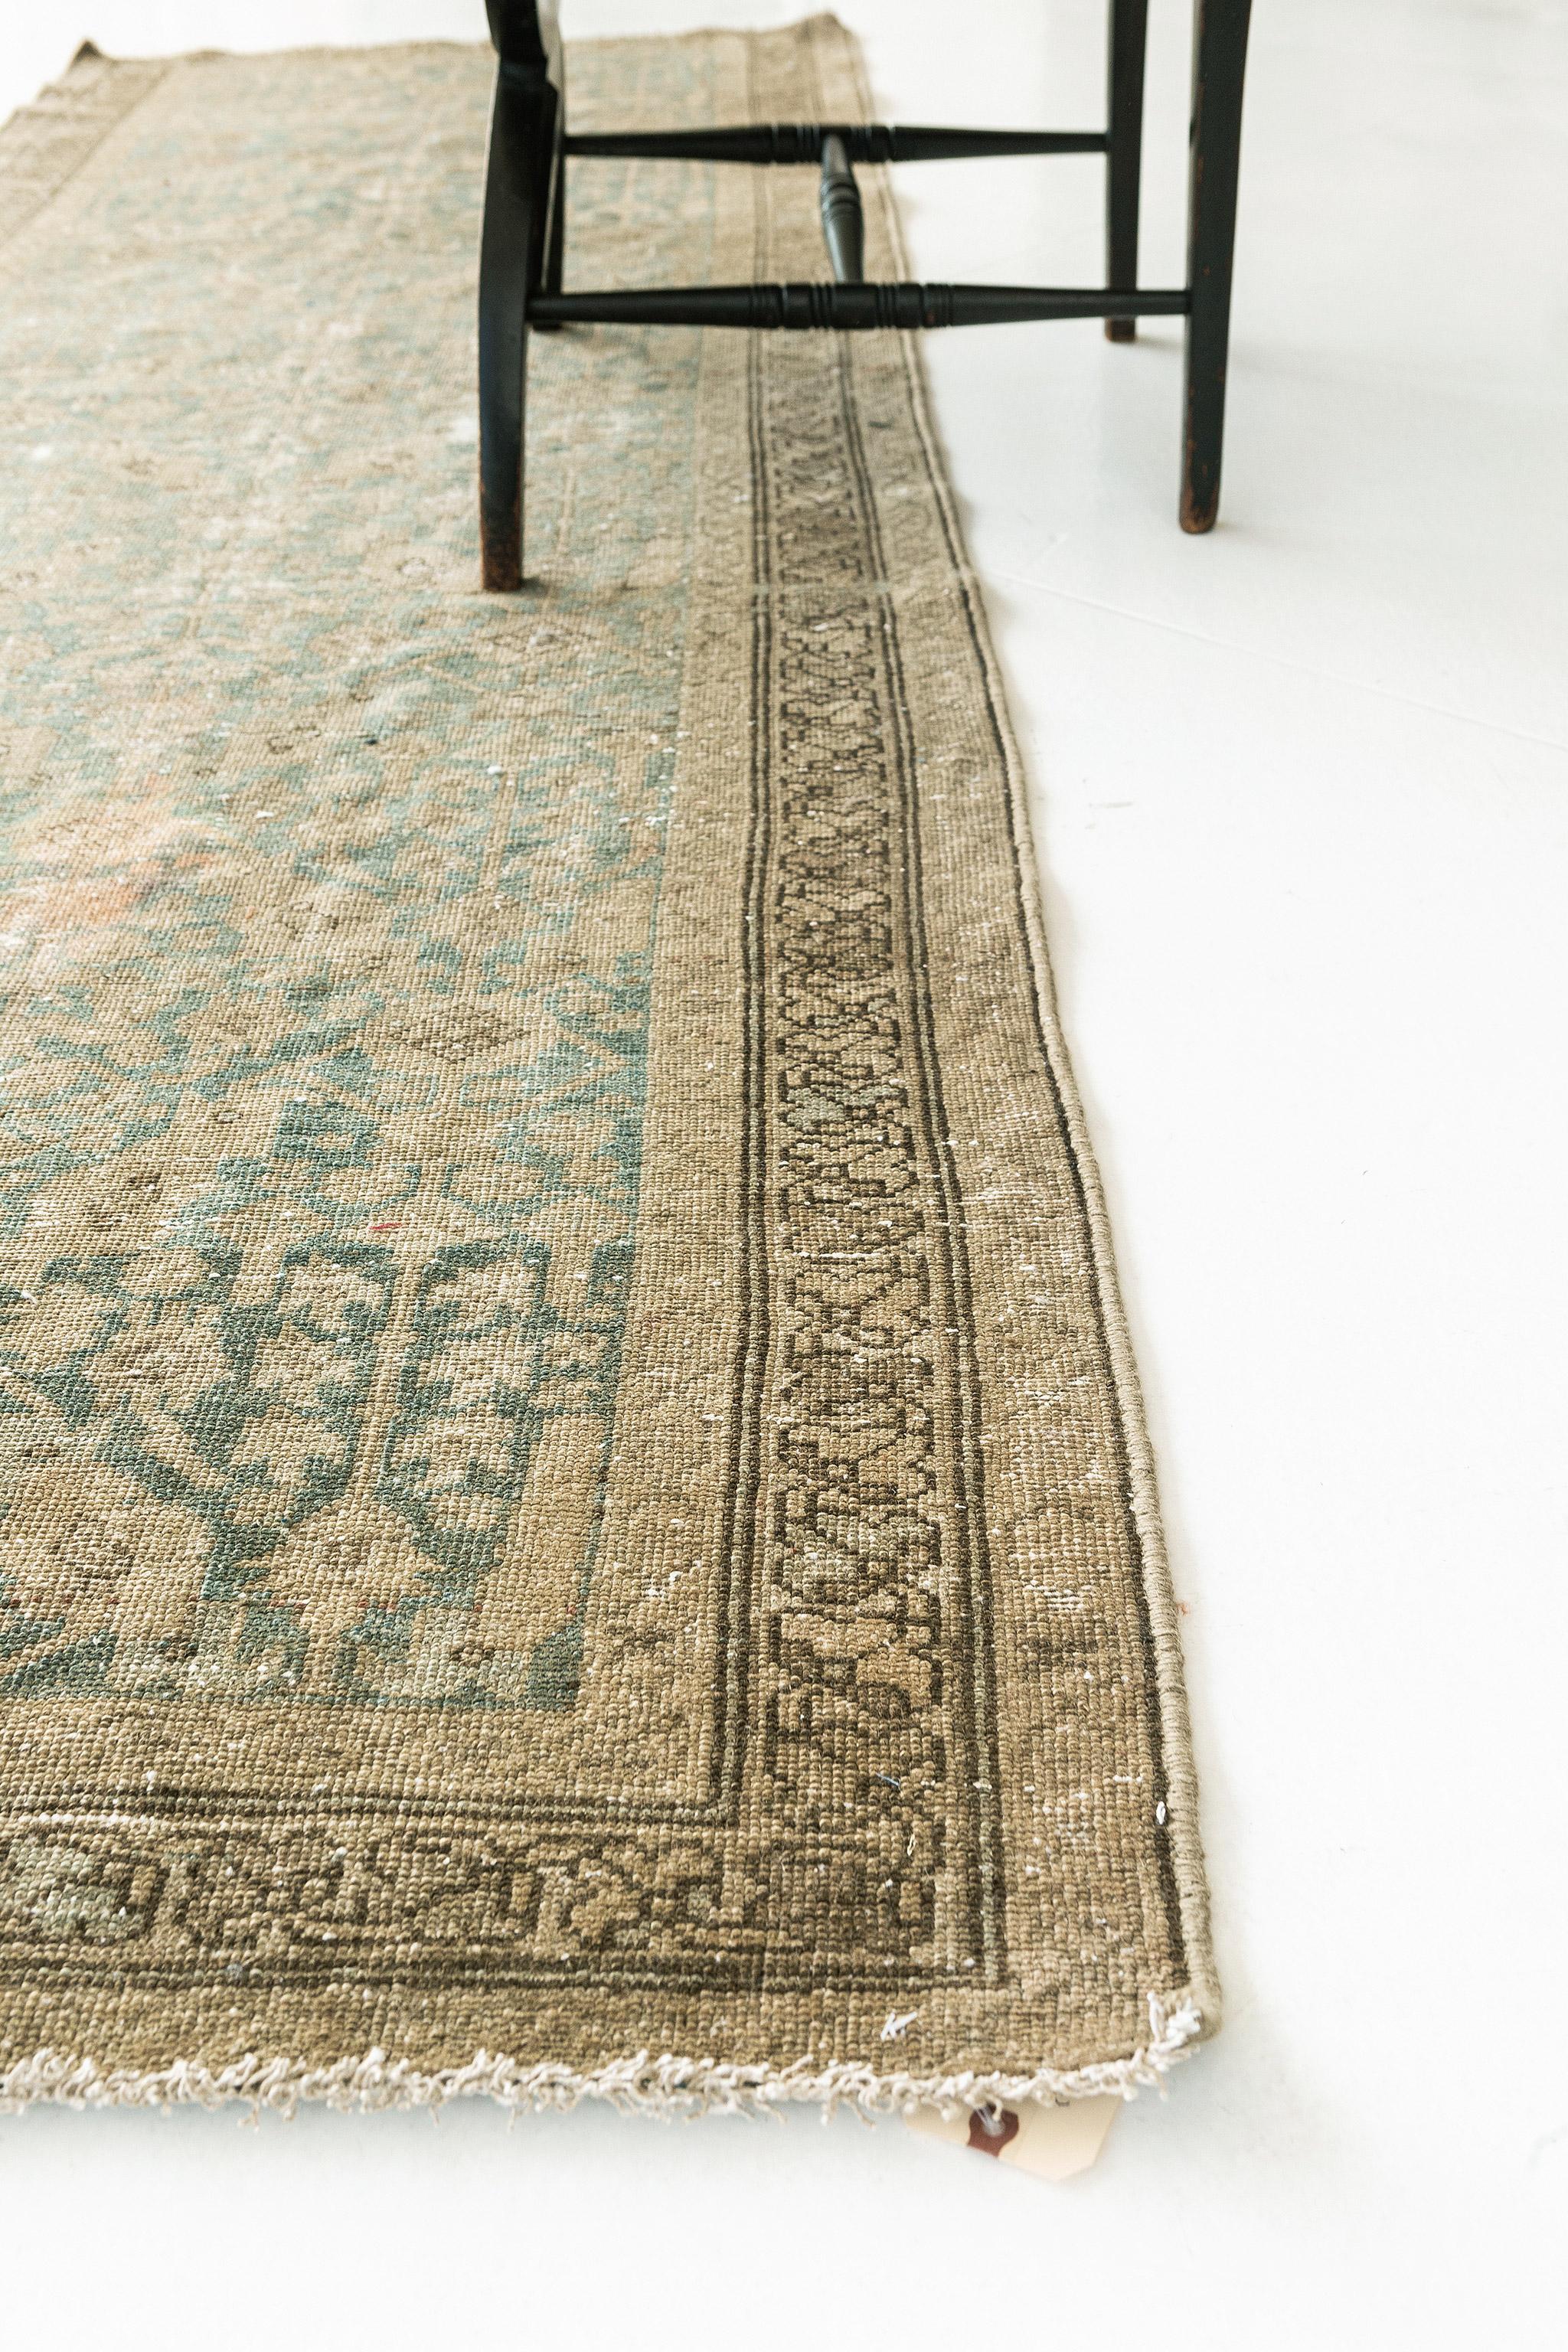 Wool Antique Persian Malayer Runner 26390 For Sale